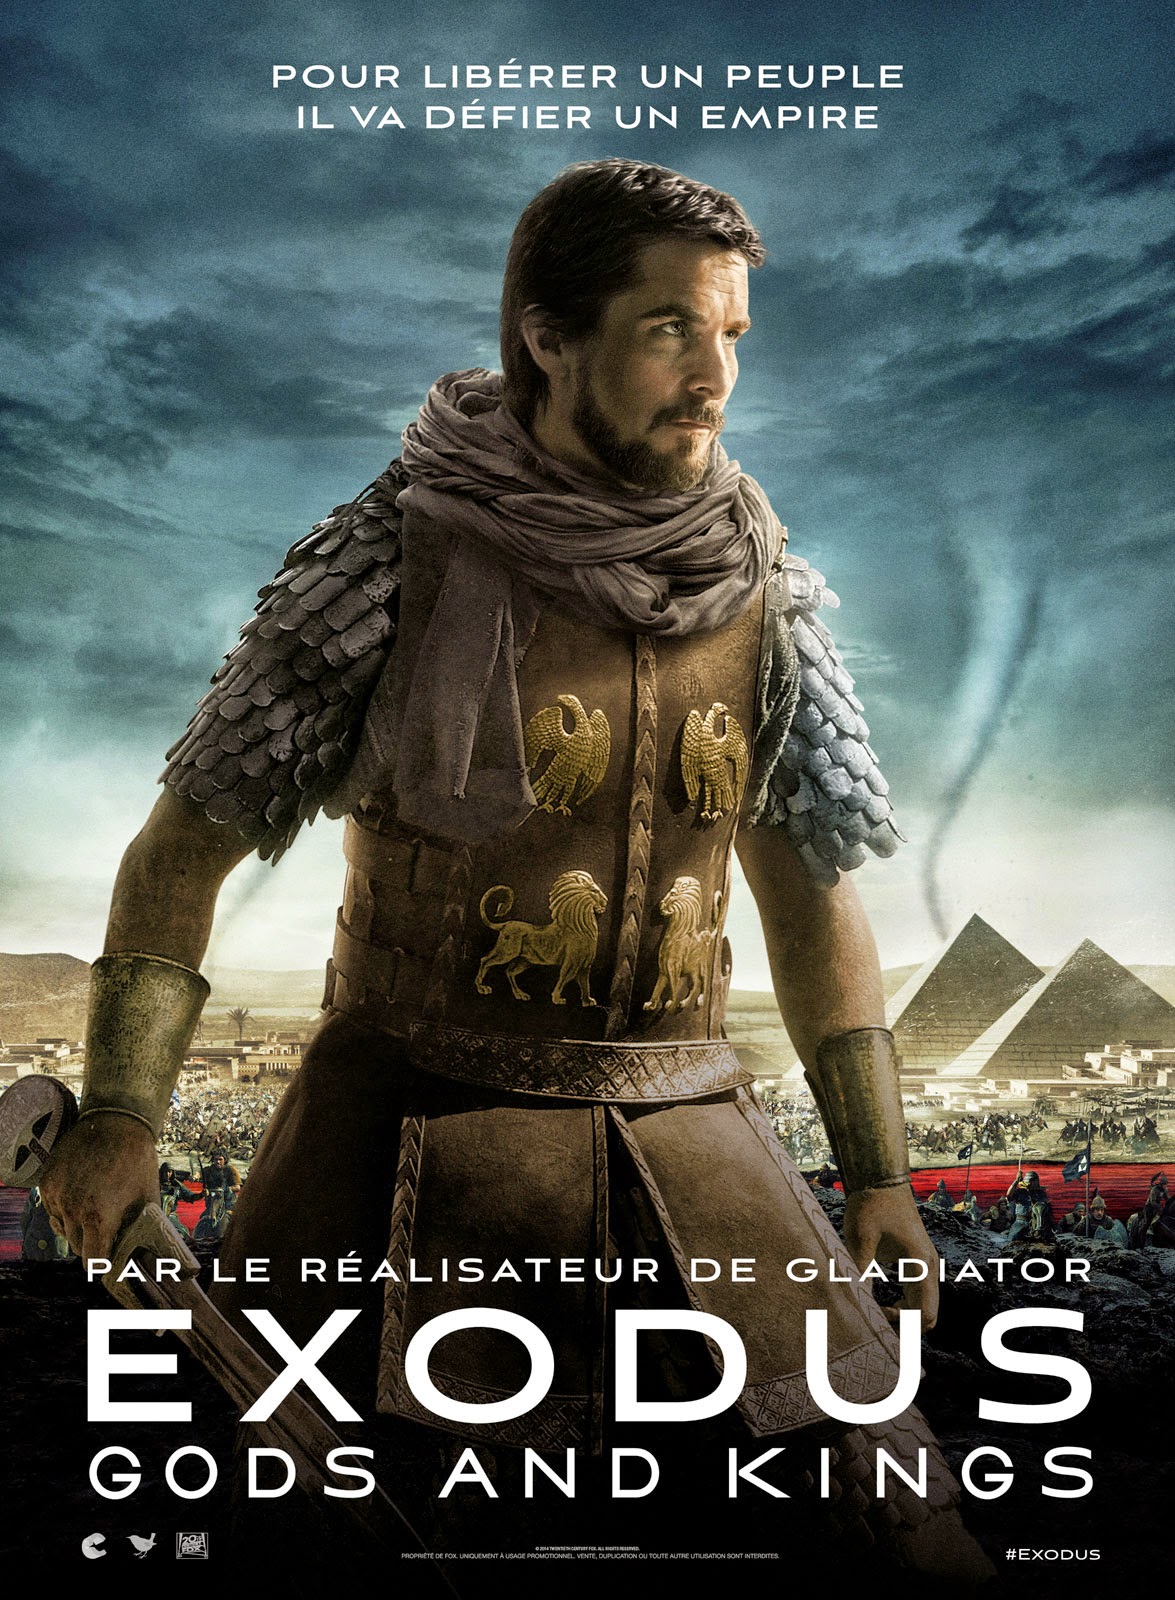 http://fuckingcinephiles.blogspot.fr/2014/12/critique-exodus-gods-and-kings.html